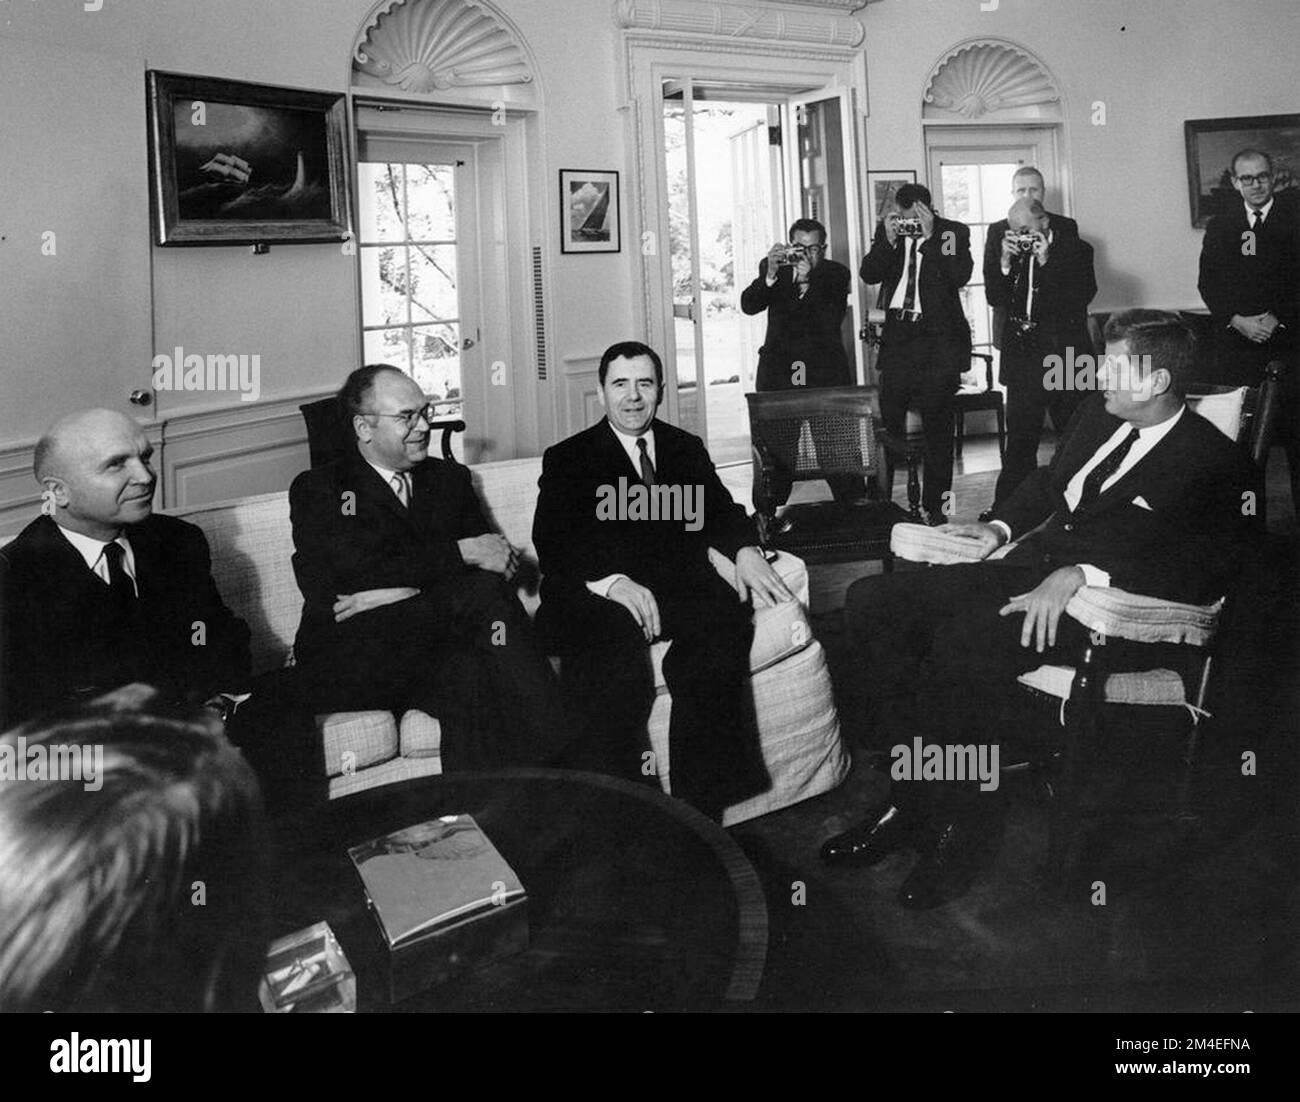 President John F Kennedy meets with Soviet Foreign Minister Andrei Gromyko in the Oval Office (October 18, 1962) Photo 'Abbie Rowe. White House Photographs. John F. Kennedy Presidential Library and Museum, Boston' Stock Photo